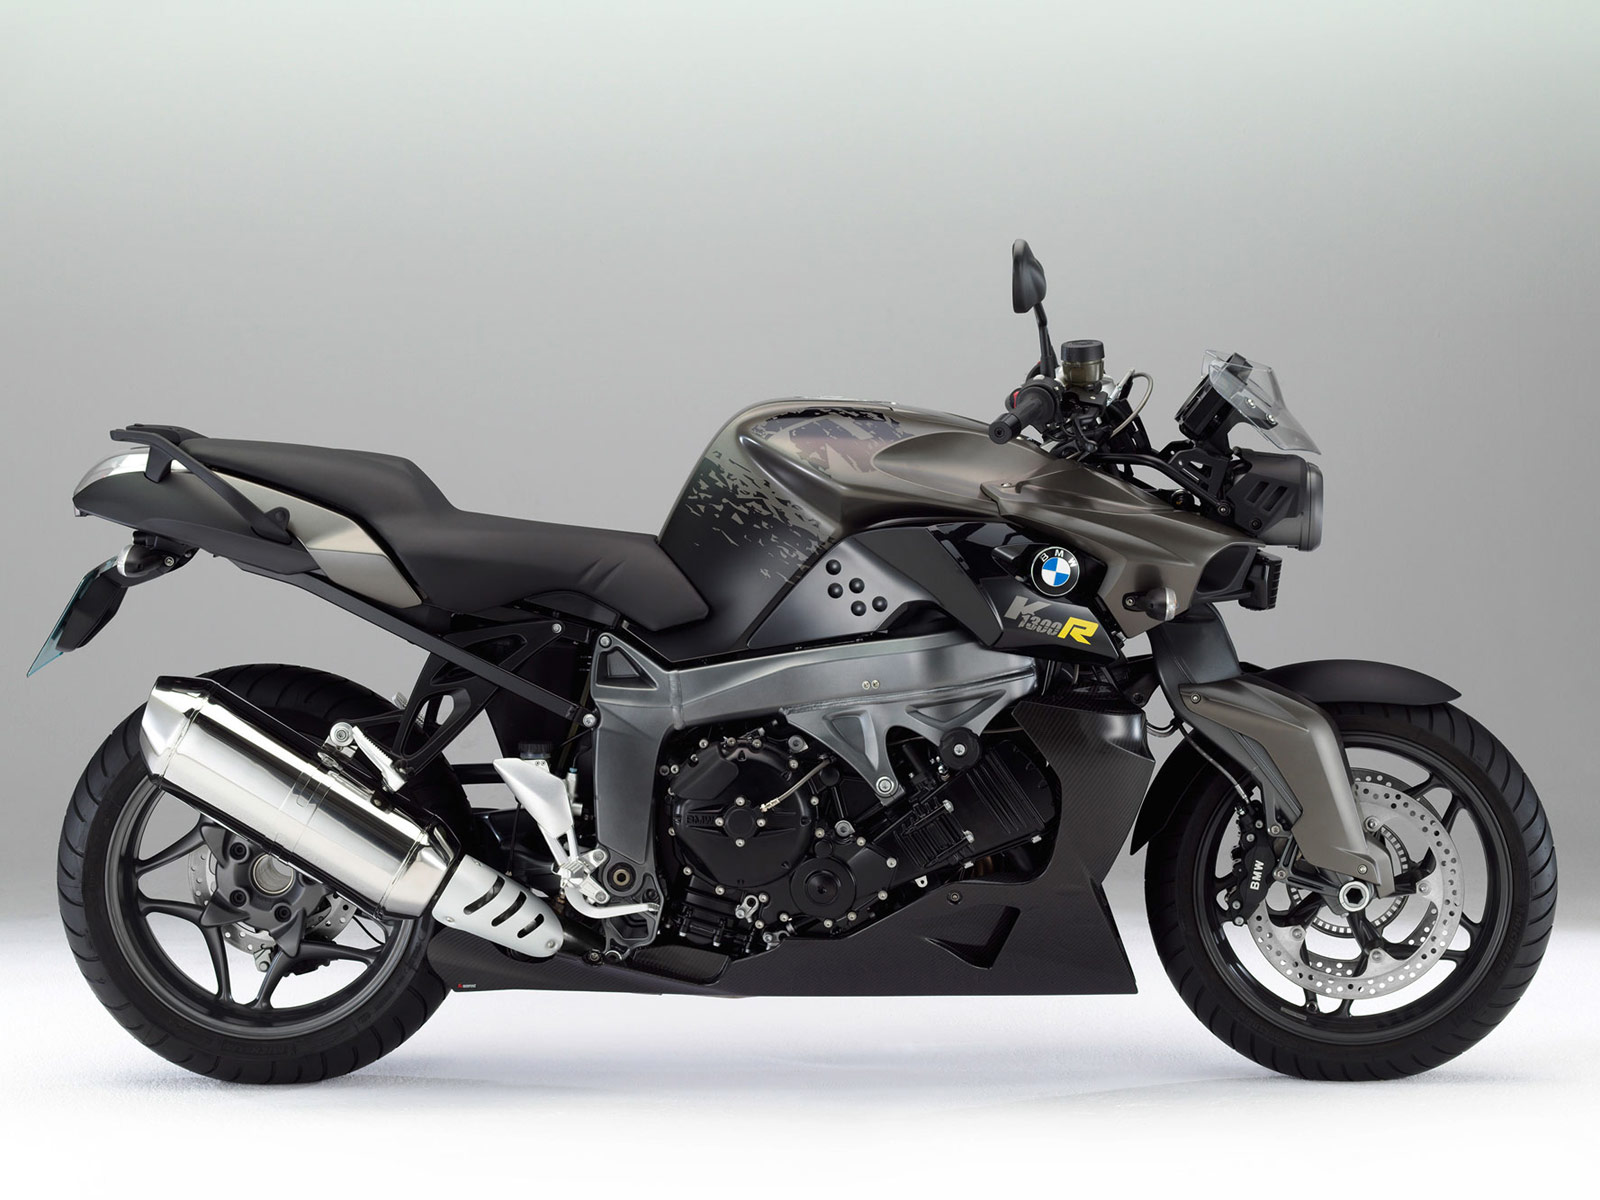 2012 BMW K1300R desktop wallpapers, specifications, review